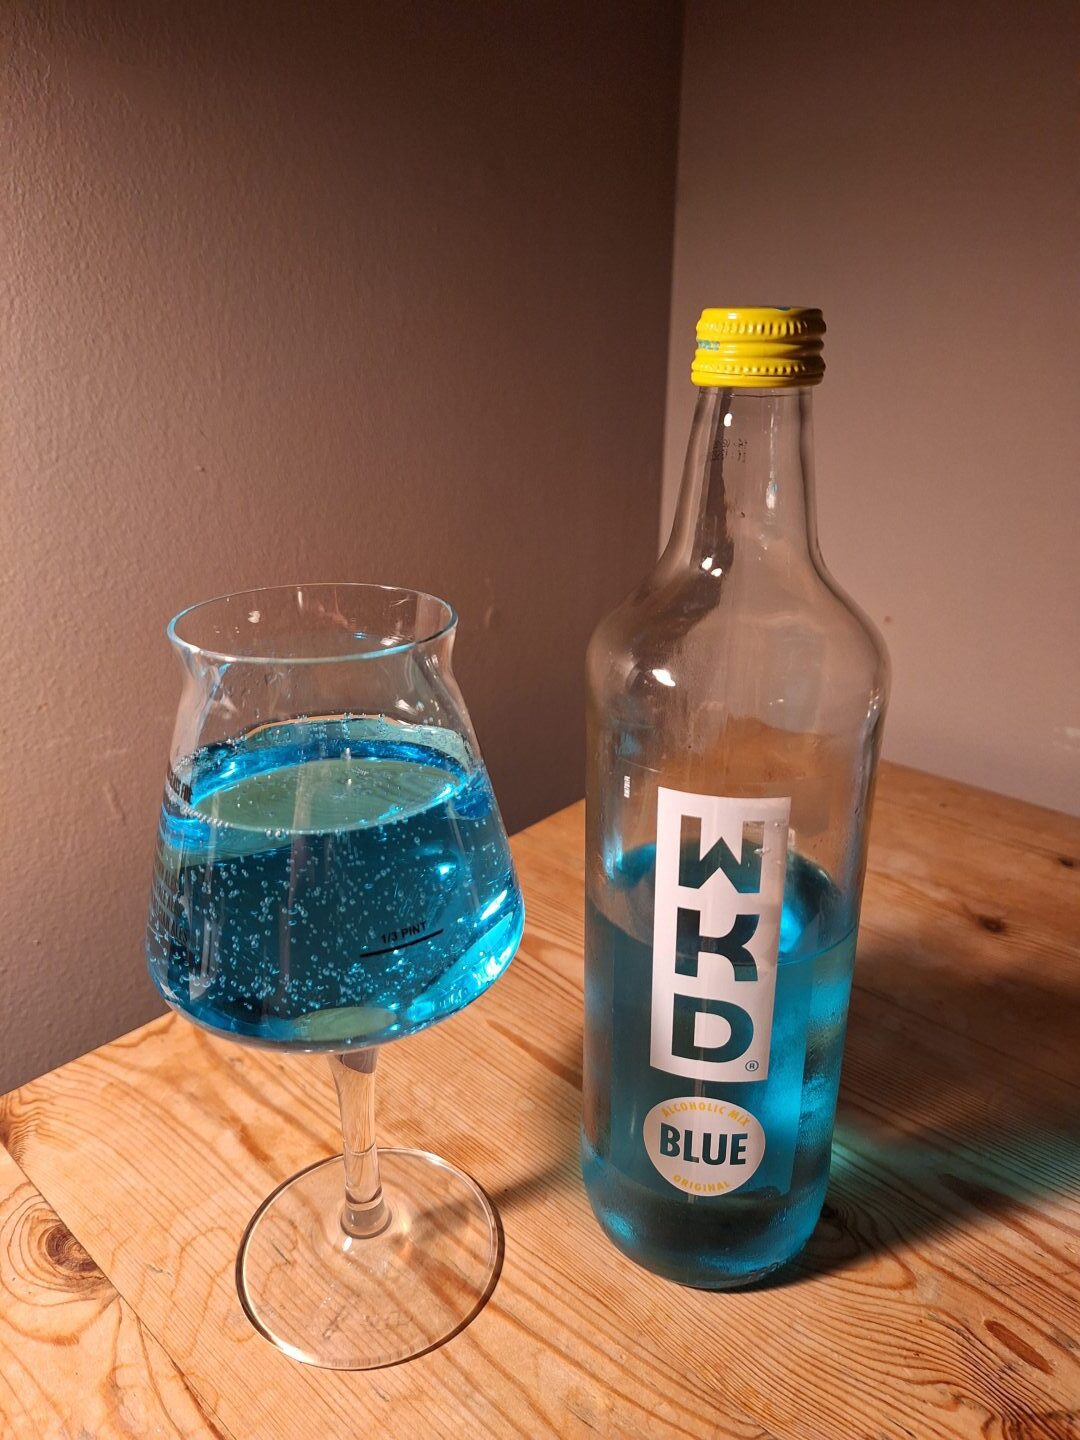 WKD Blue, poured out into a glass. 